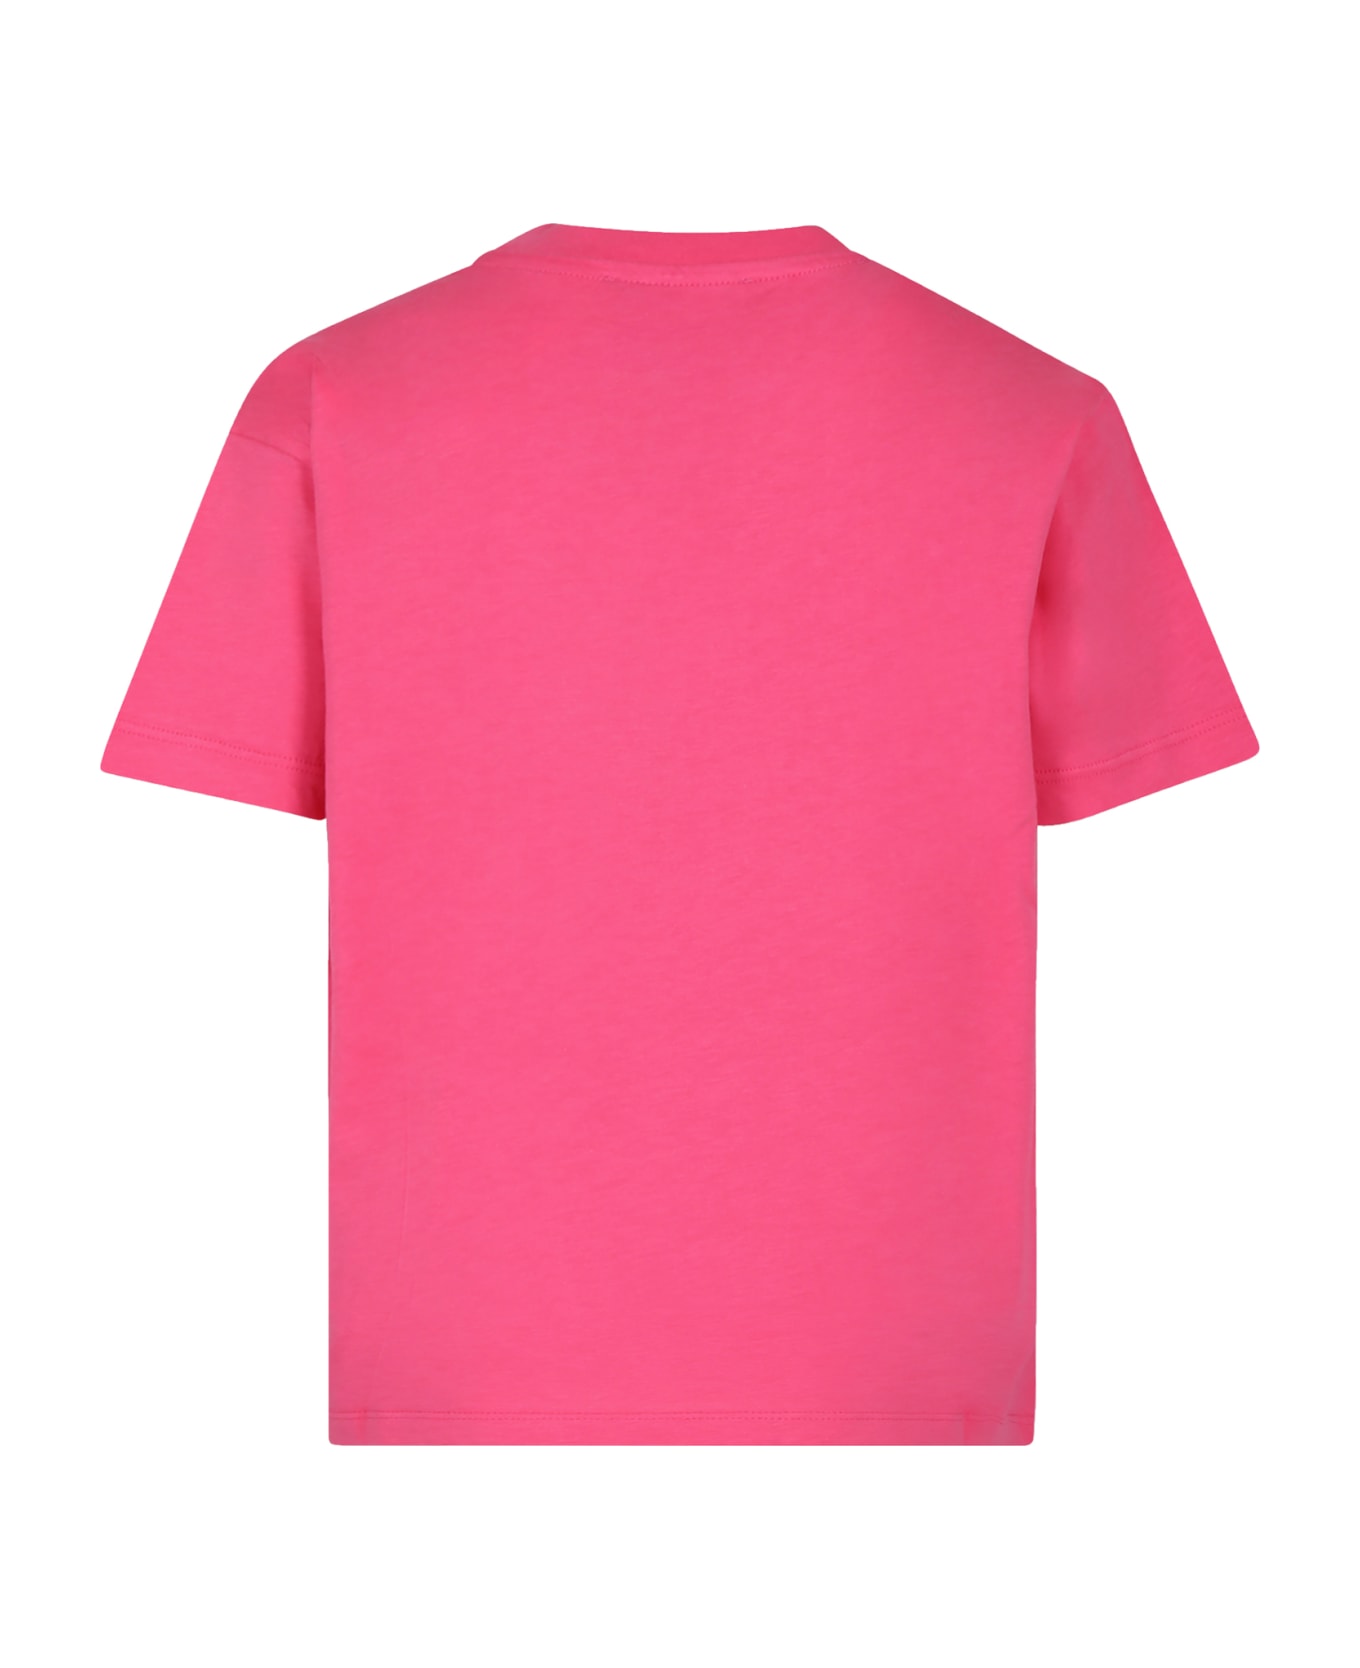 MSGM Pink T-shirt For Girl With Logo - Pink